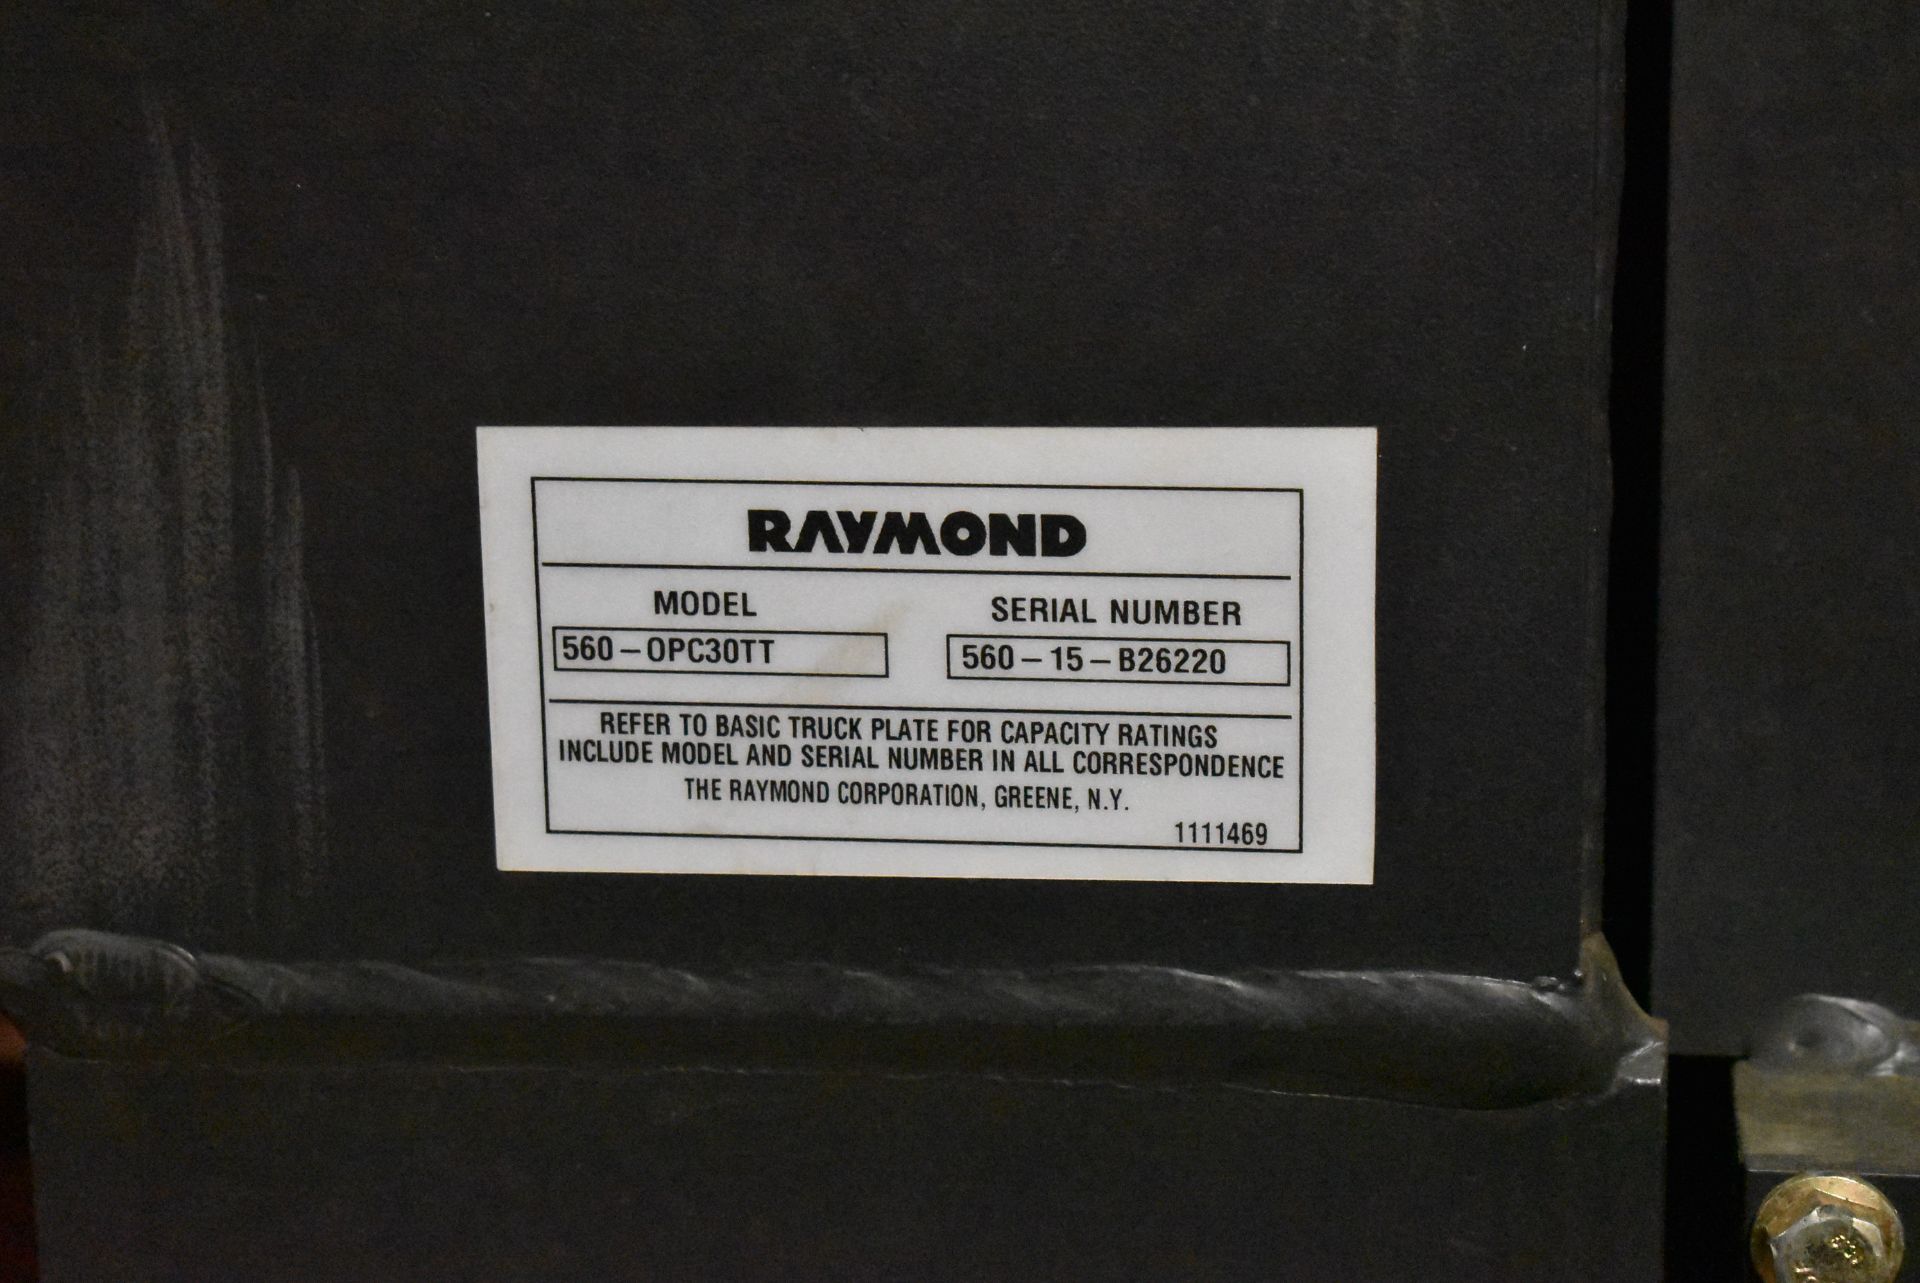 RAYMOND (2015) 560-OPC30TT 1,700 LB. CAPACITY 36V ELECTRIC ORDER PICKER WITH 330" MAX. LIFT - Image 7 of 7